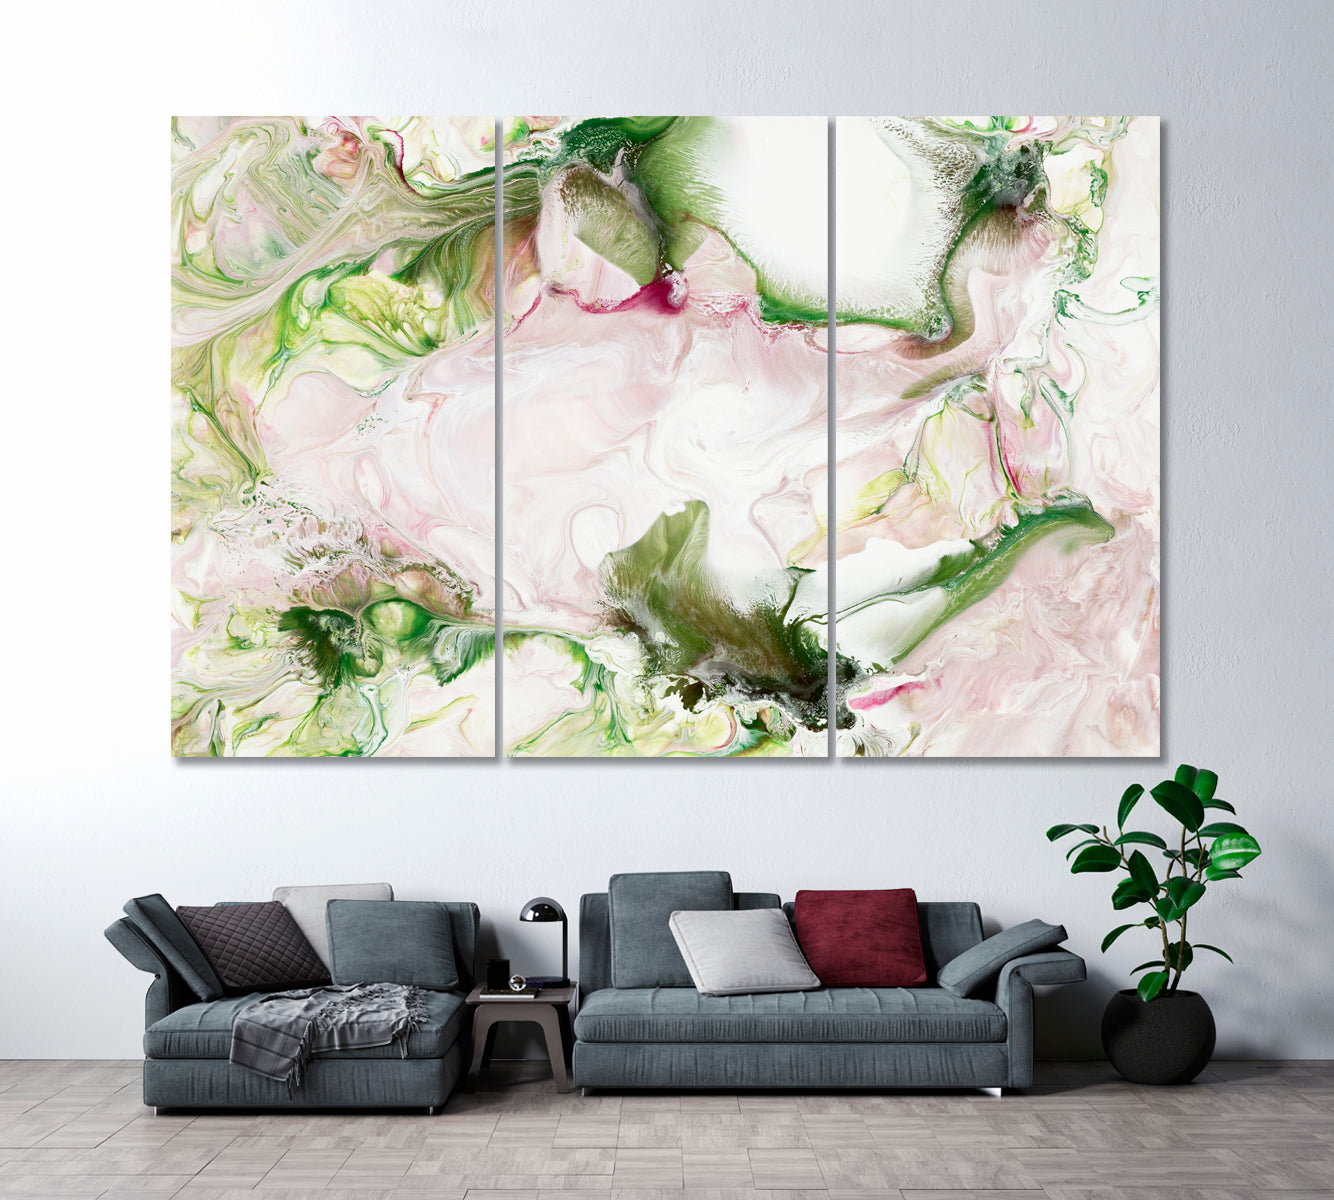 Green and Pink Abstract Composition Canvas Print ArtLexy 3 Panels 36"x24" inches 